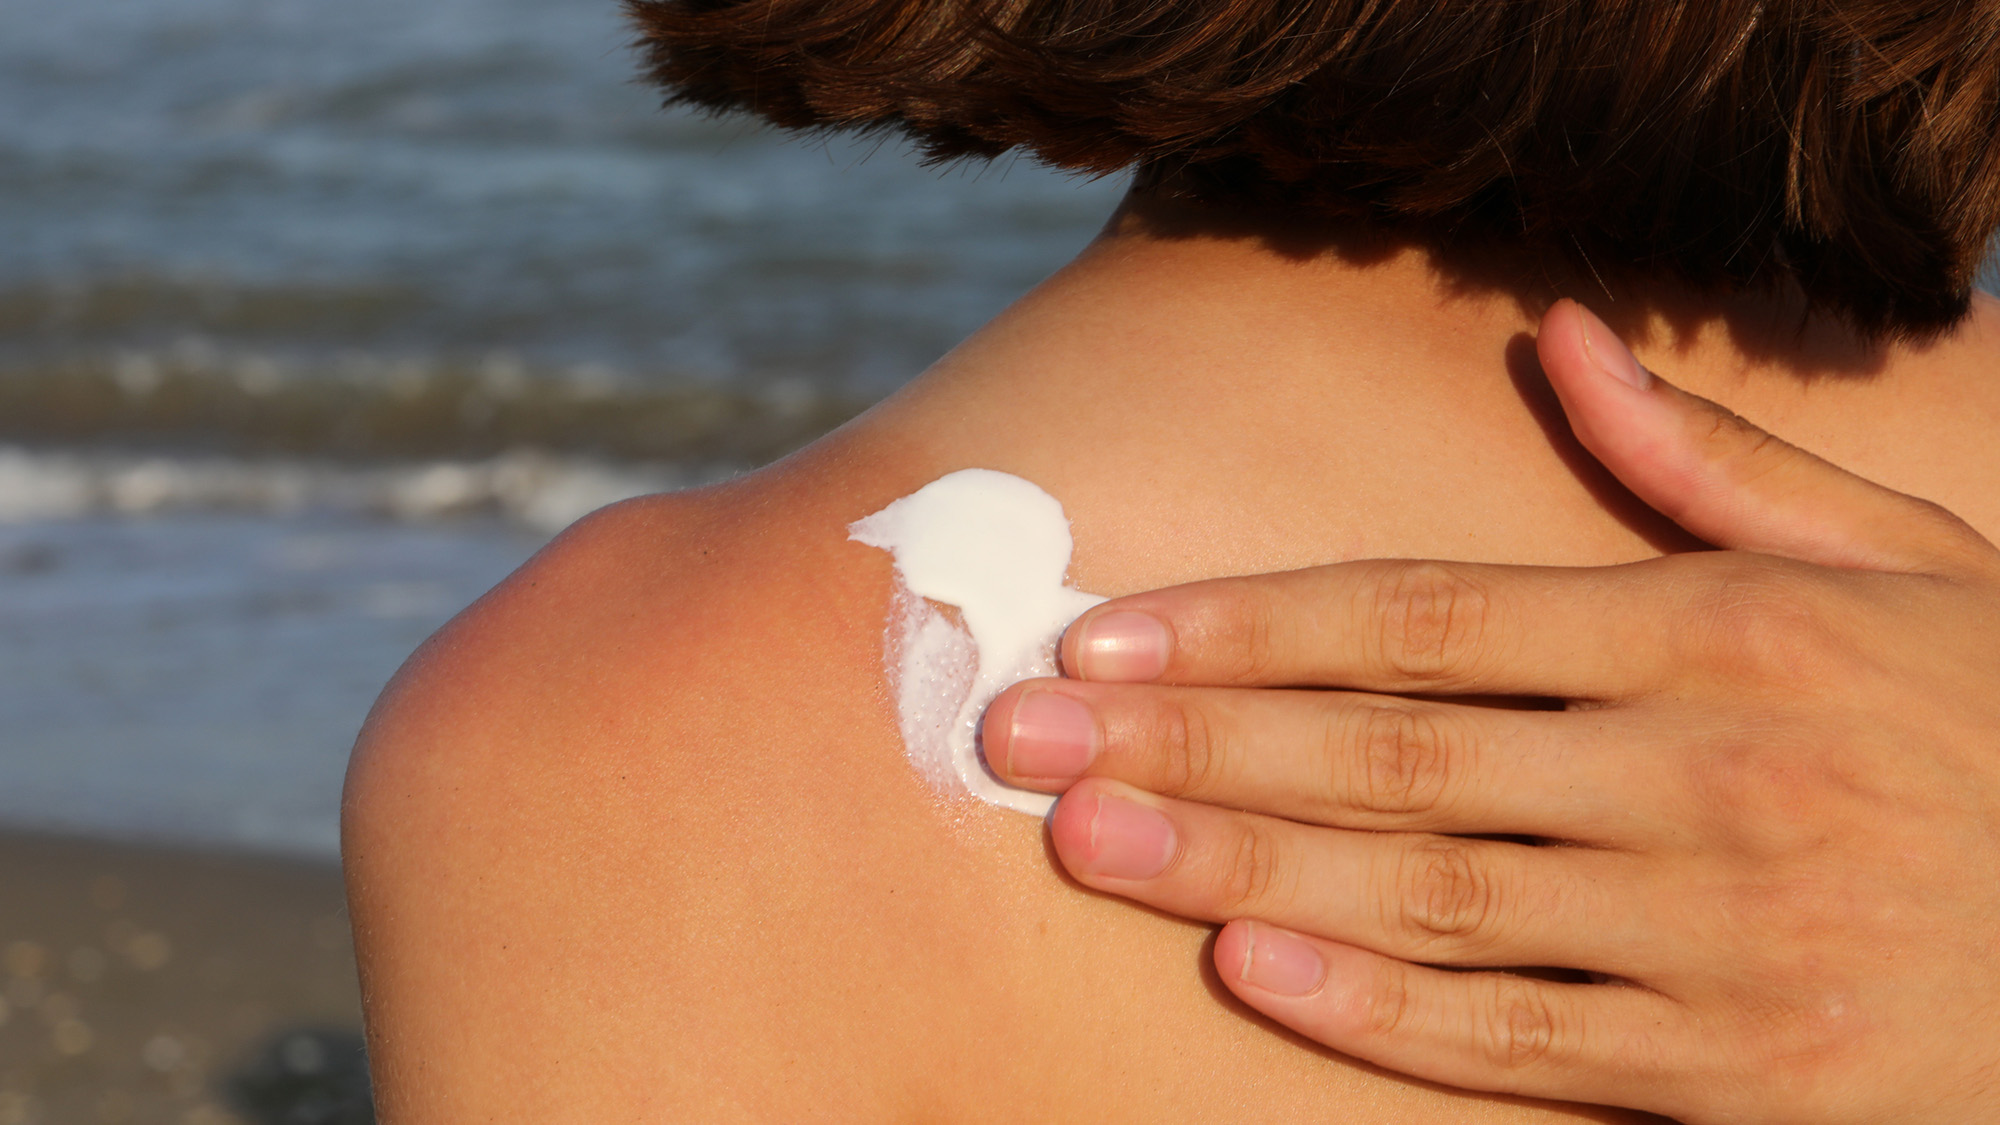 Why Americans aren’t getting better sunscreens this summer